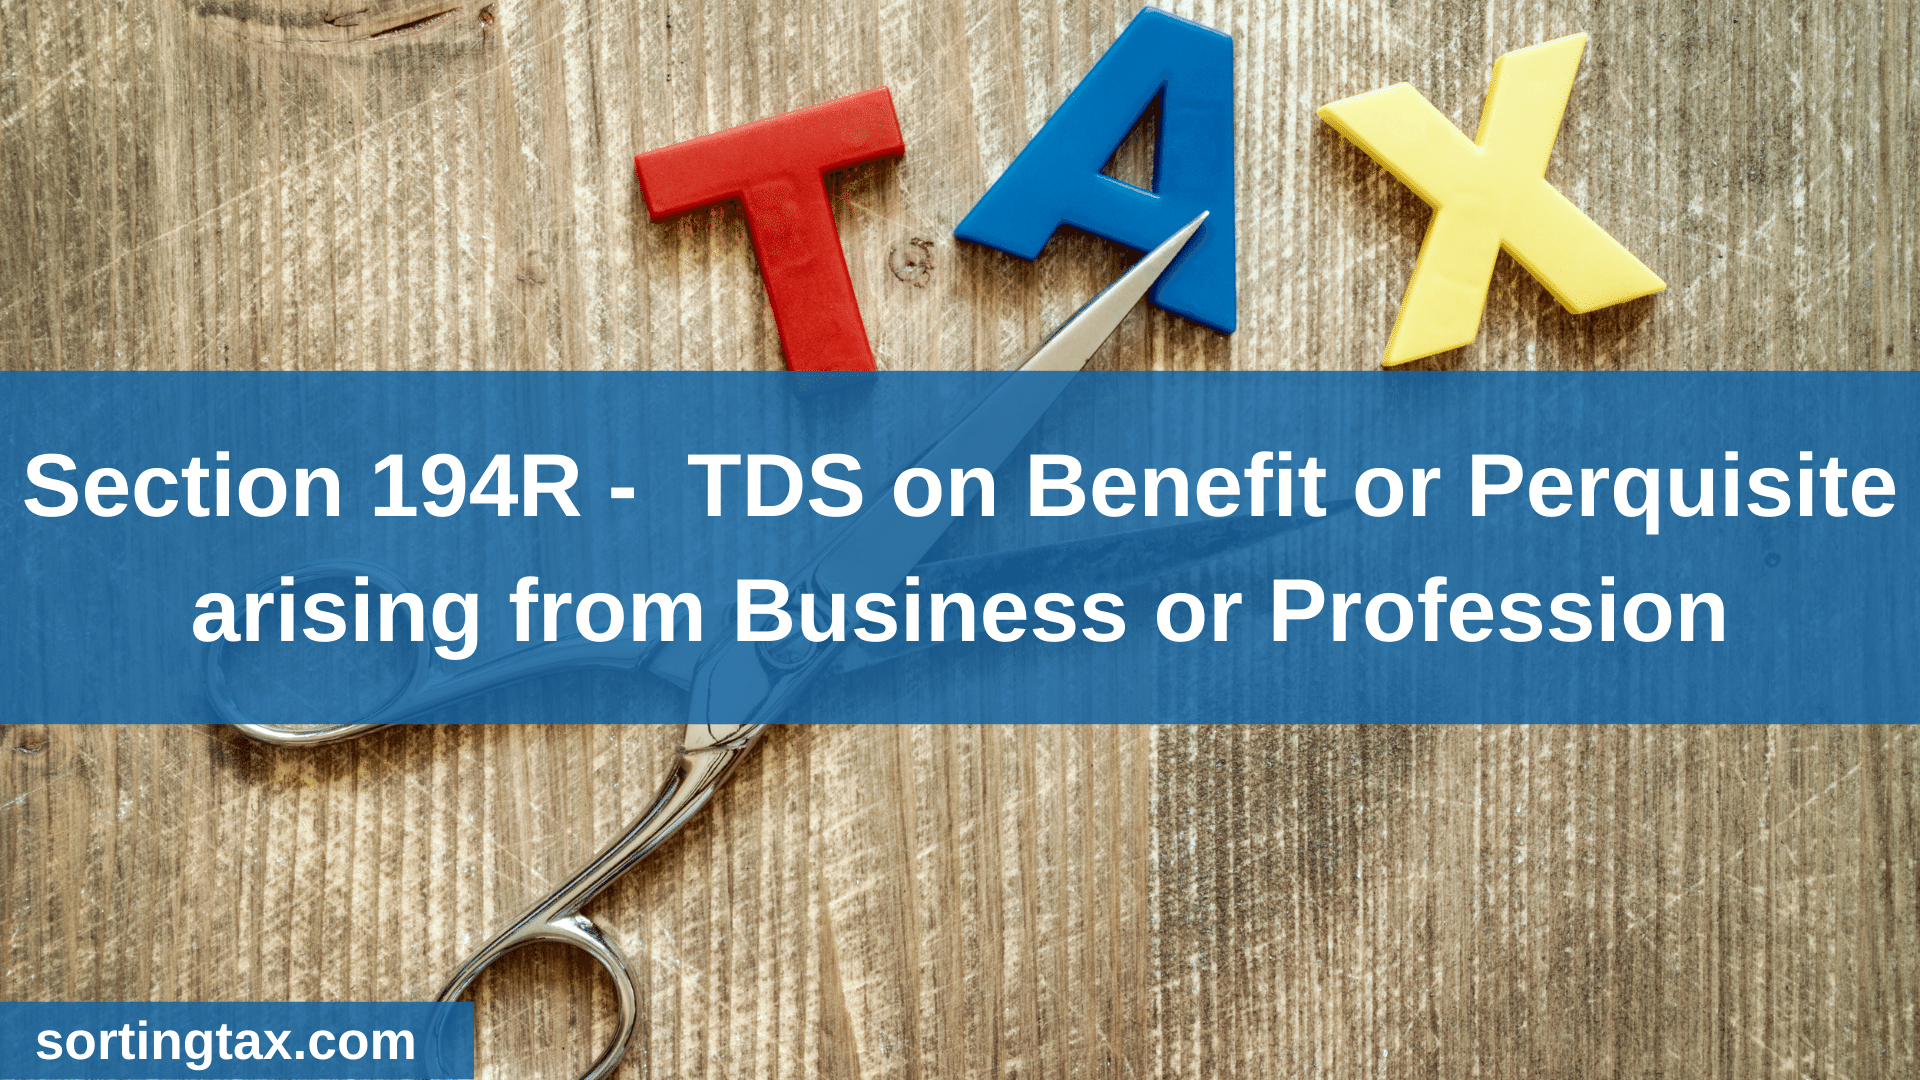 Section 194R of Income Tax Act - TDS on Benefit or Perquisite